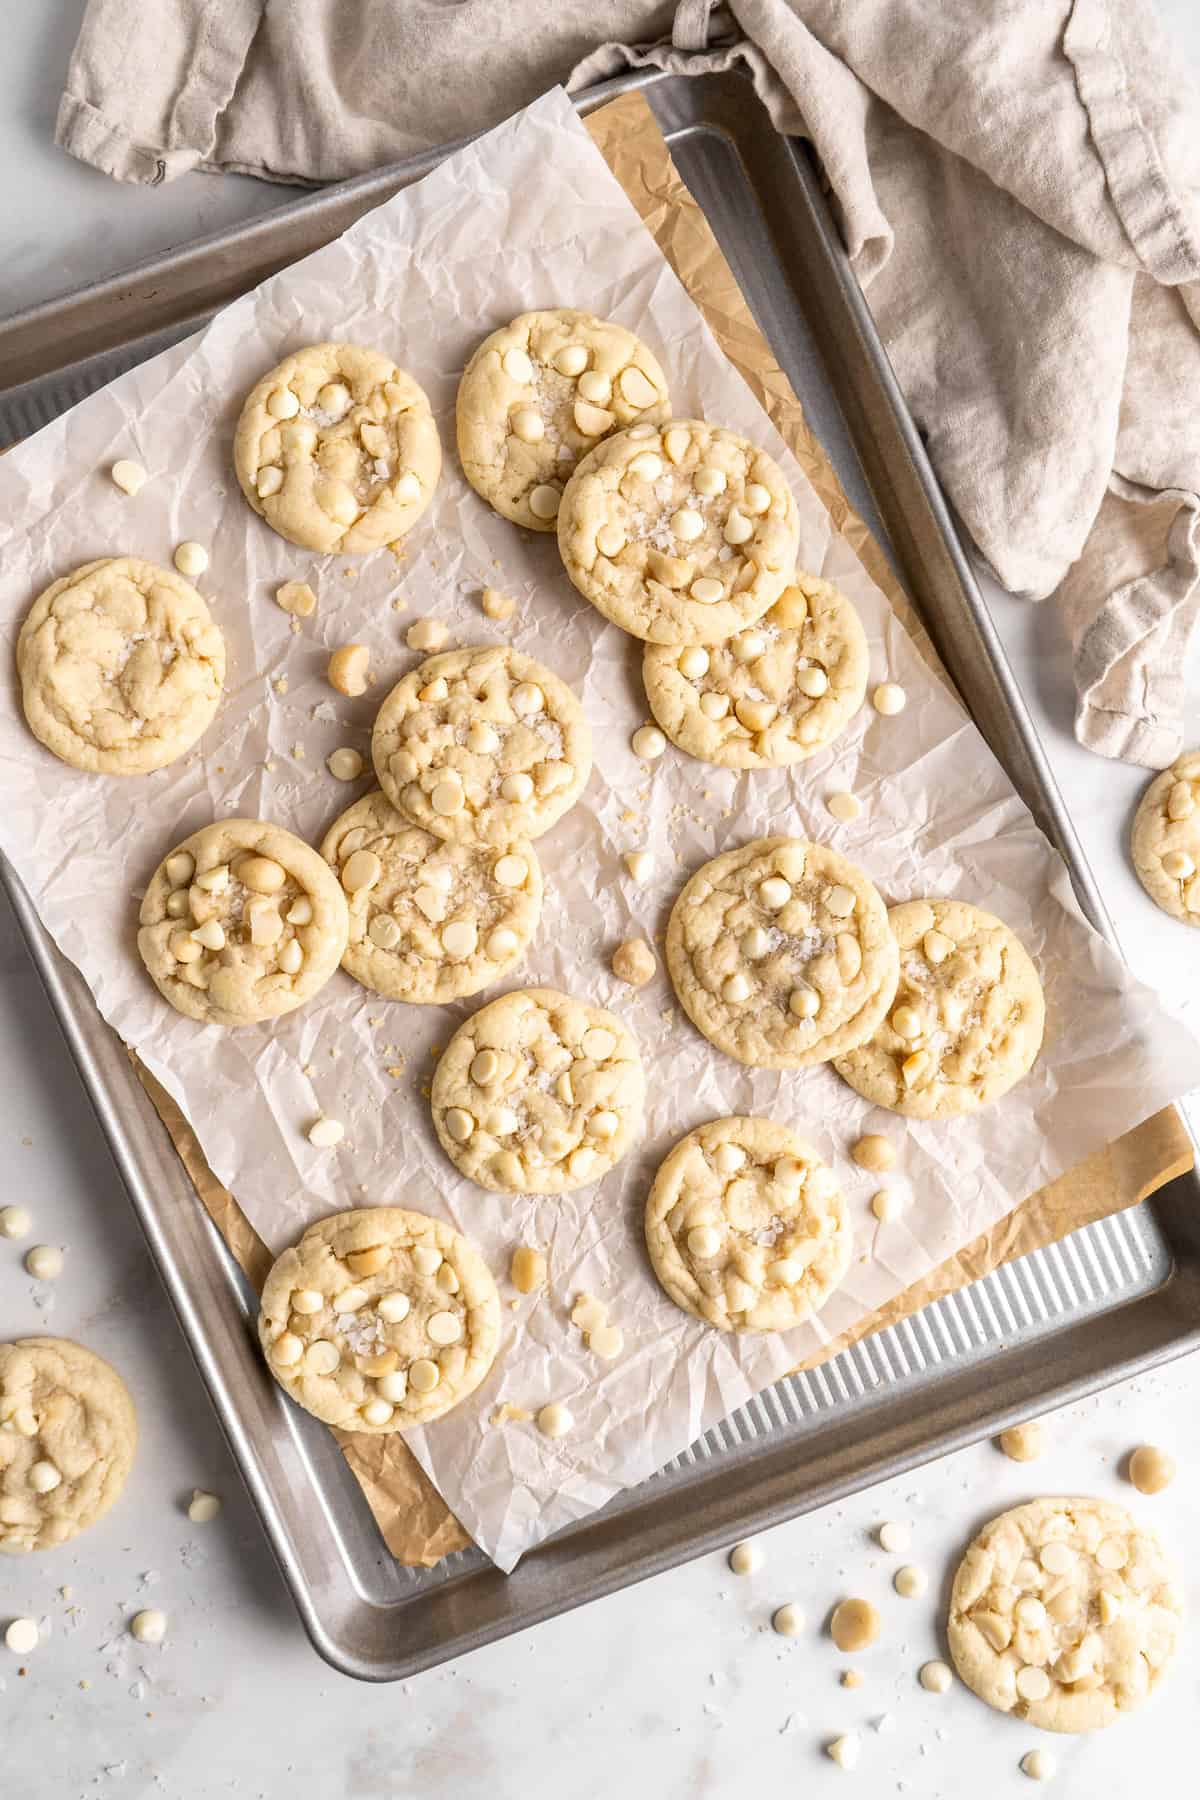 White Chocolate Macadamia Nut Cookies on parchment-lined baking sheet